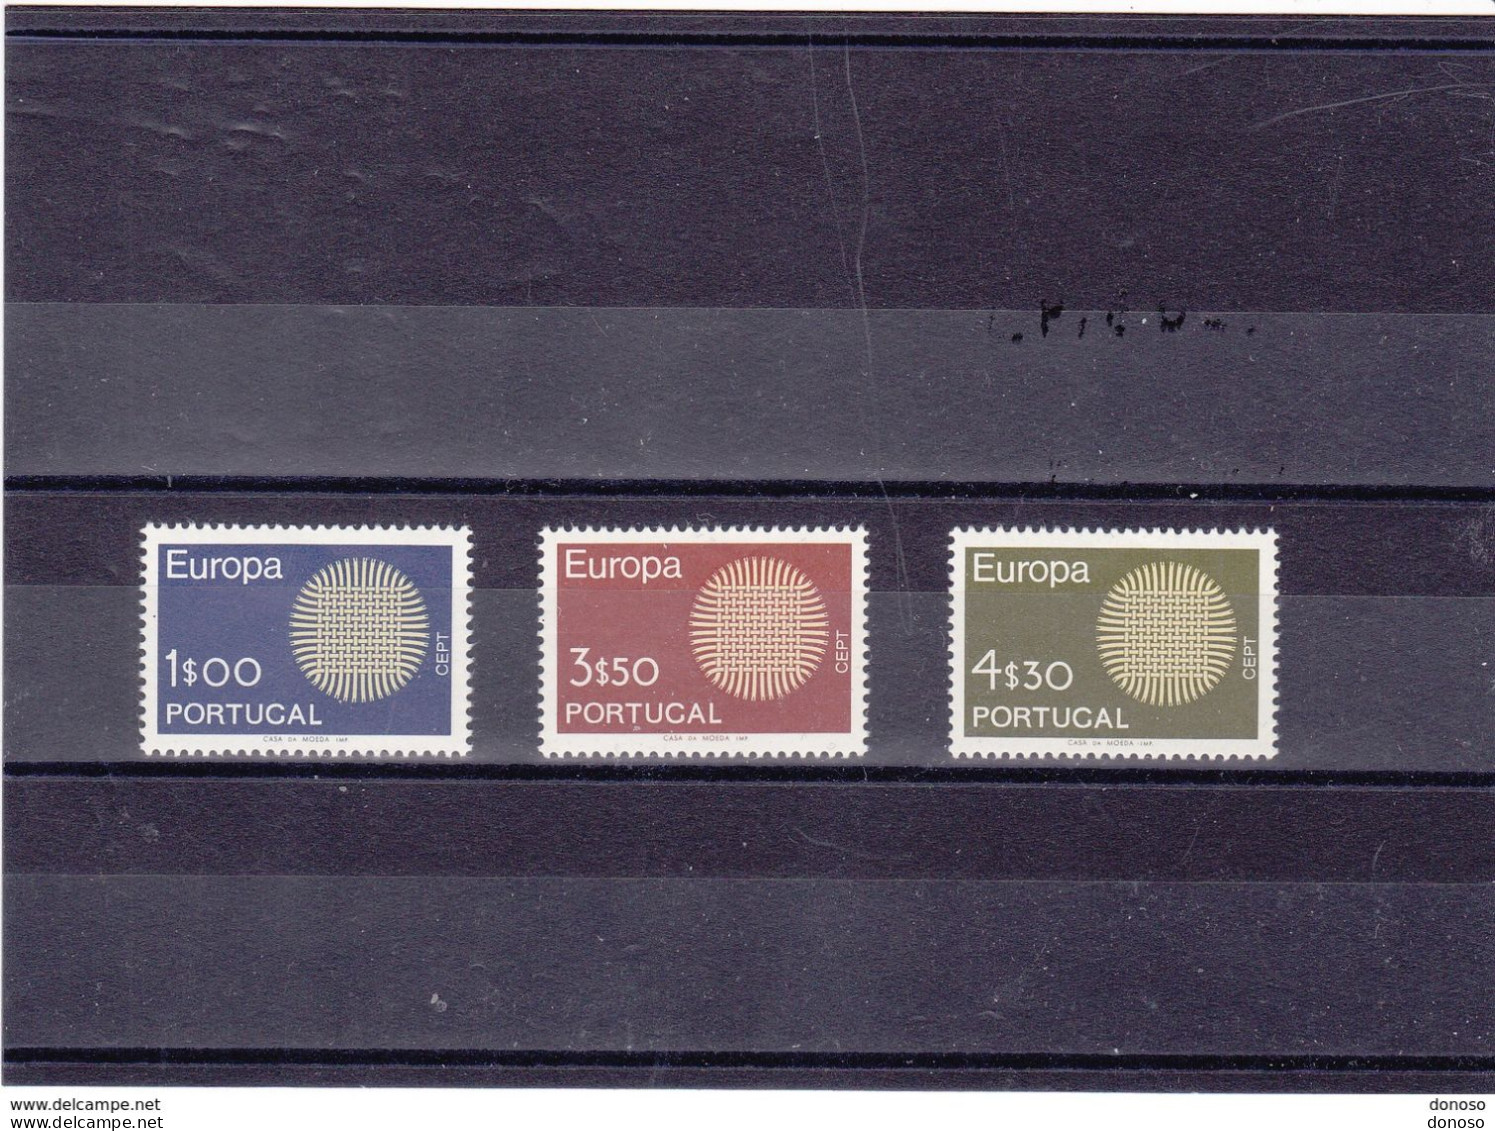 PORTUGAL 1970 EUROPA Yvert 1073-1075, Michel 1092-1094 NEUF** MNH Cote Yv 24 Euros - Unused Stamps